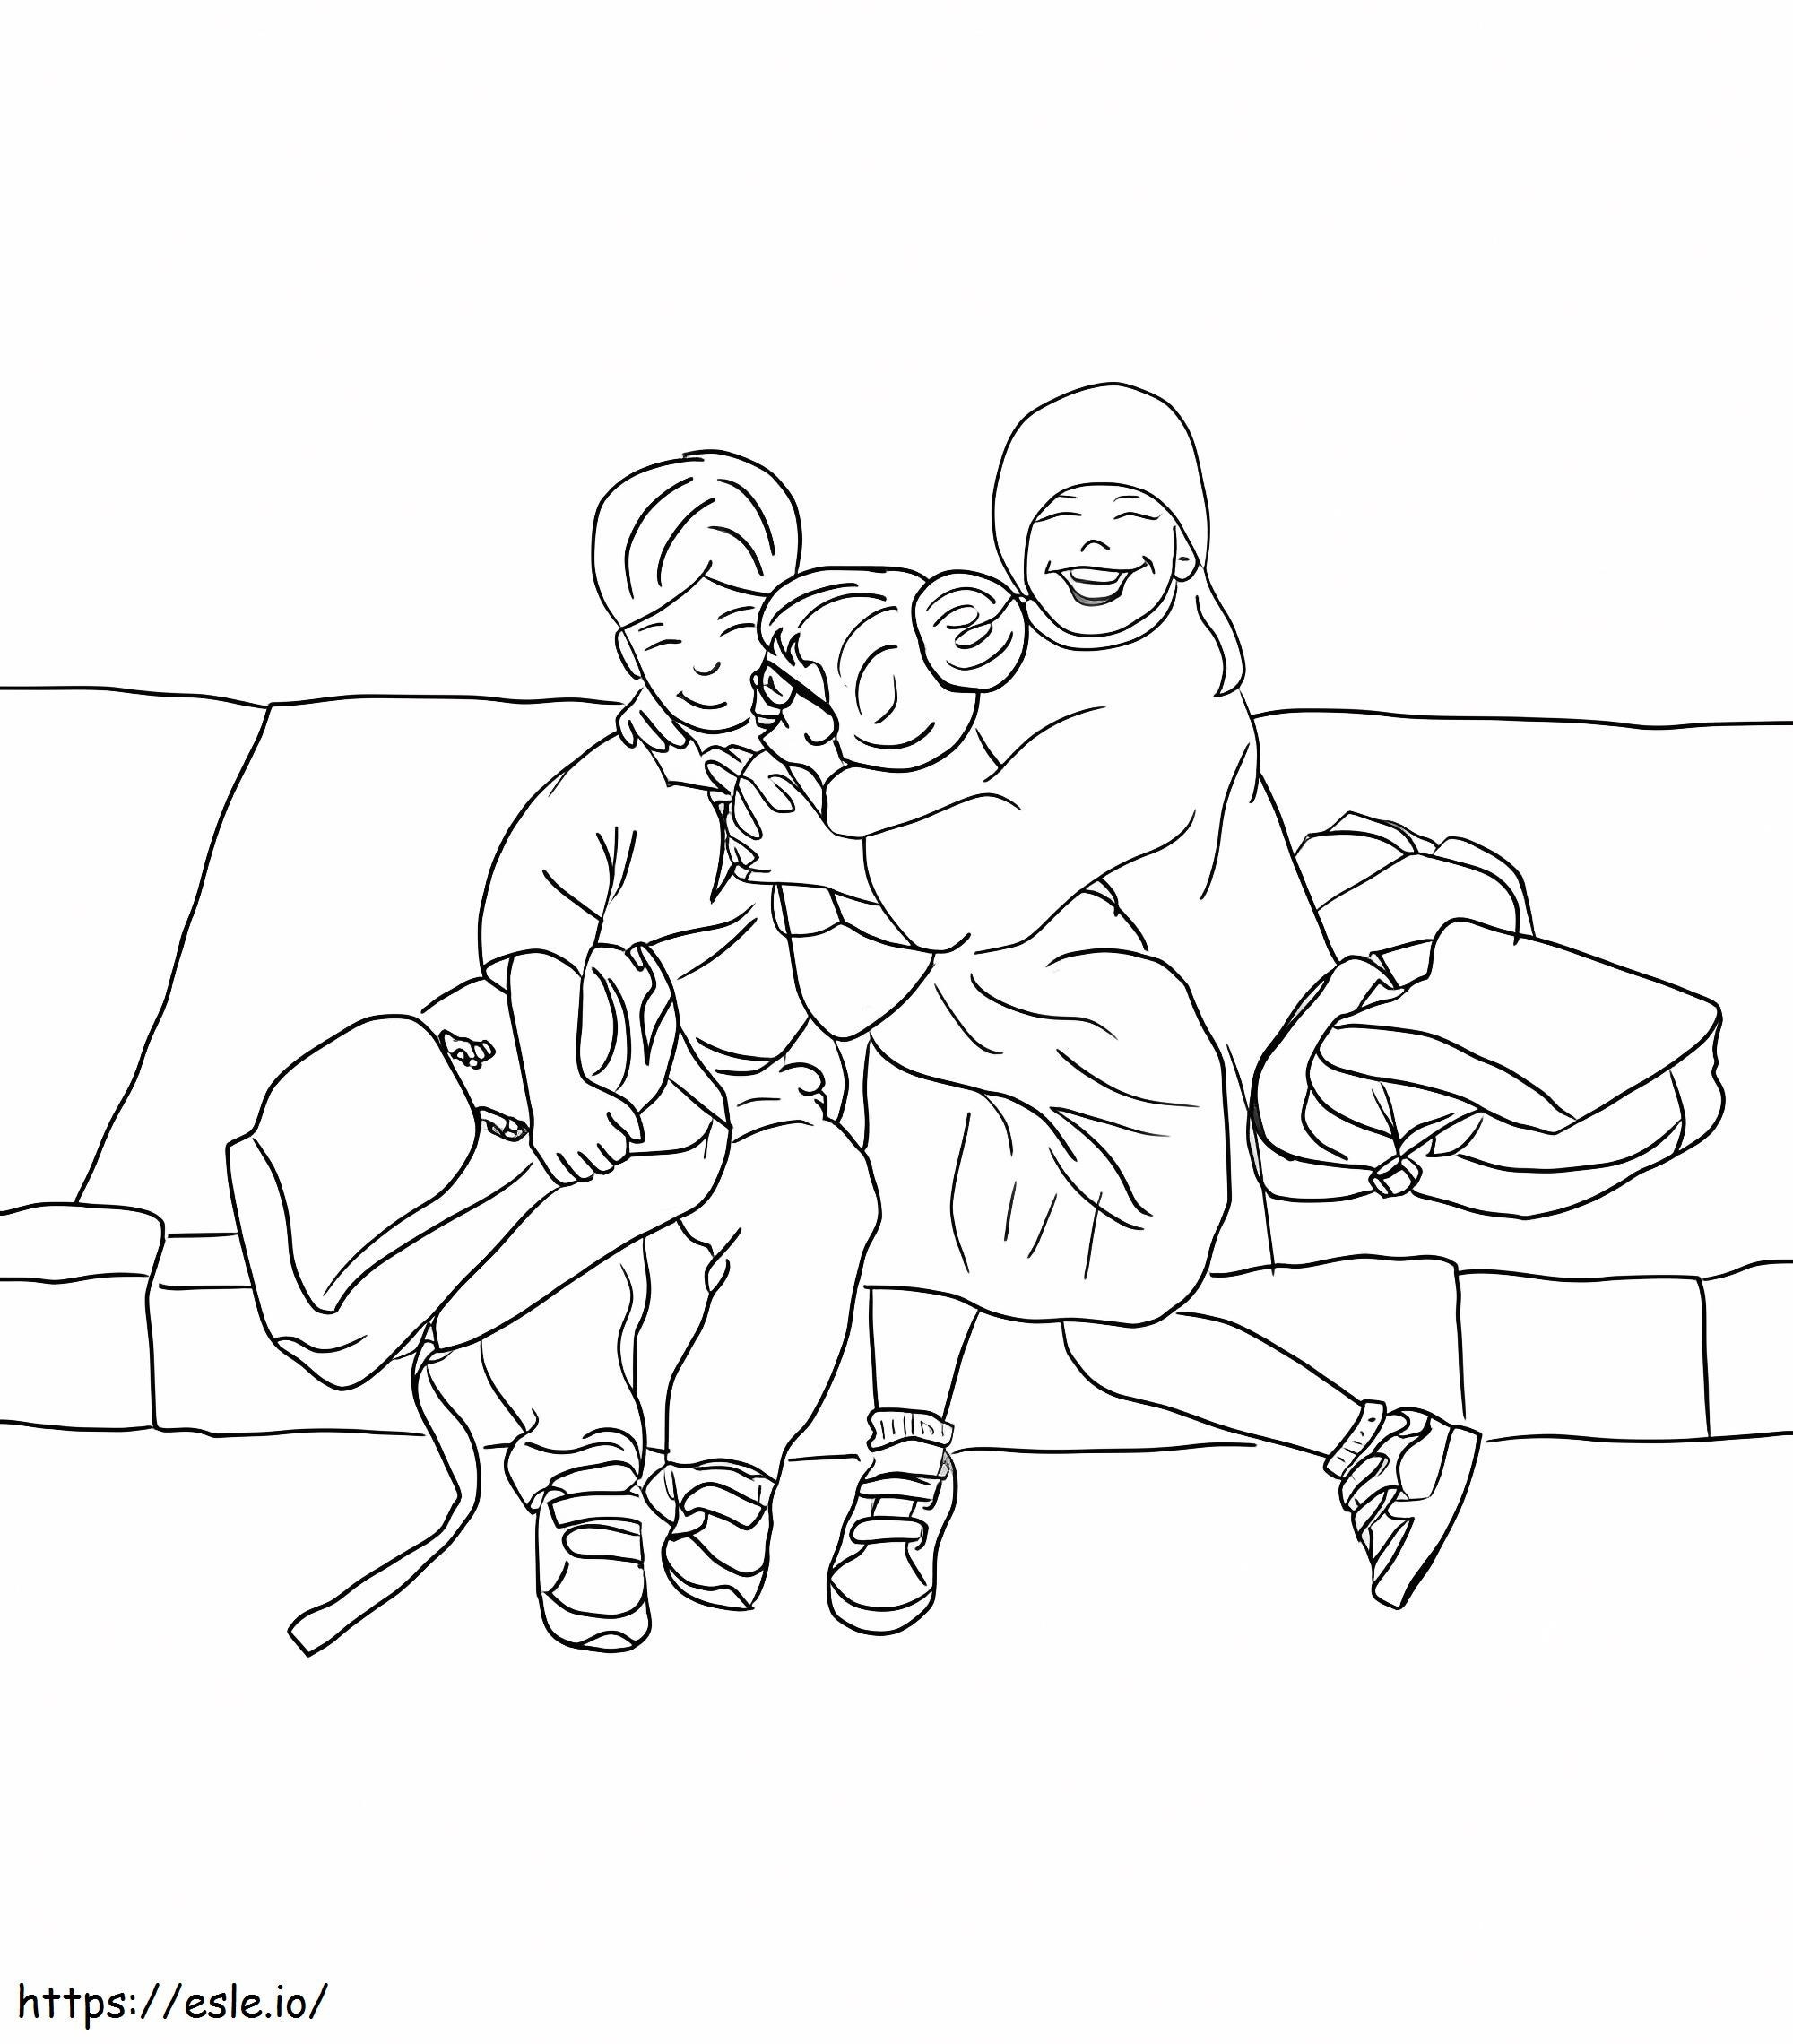 School Best Friends coloring page